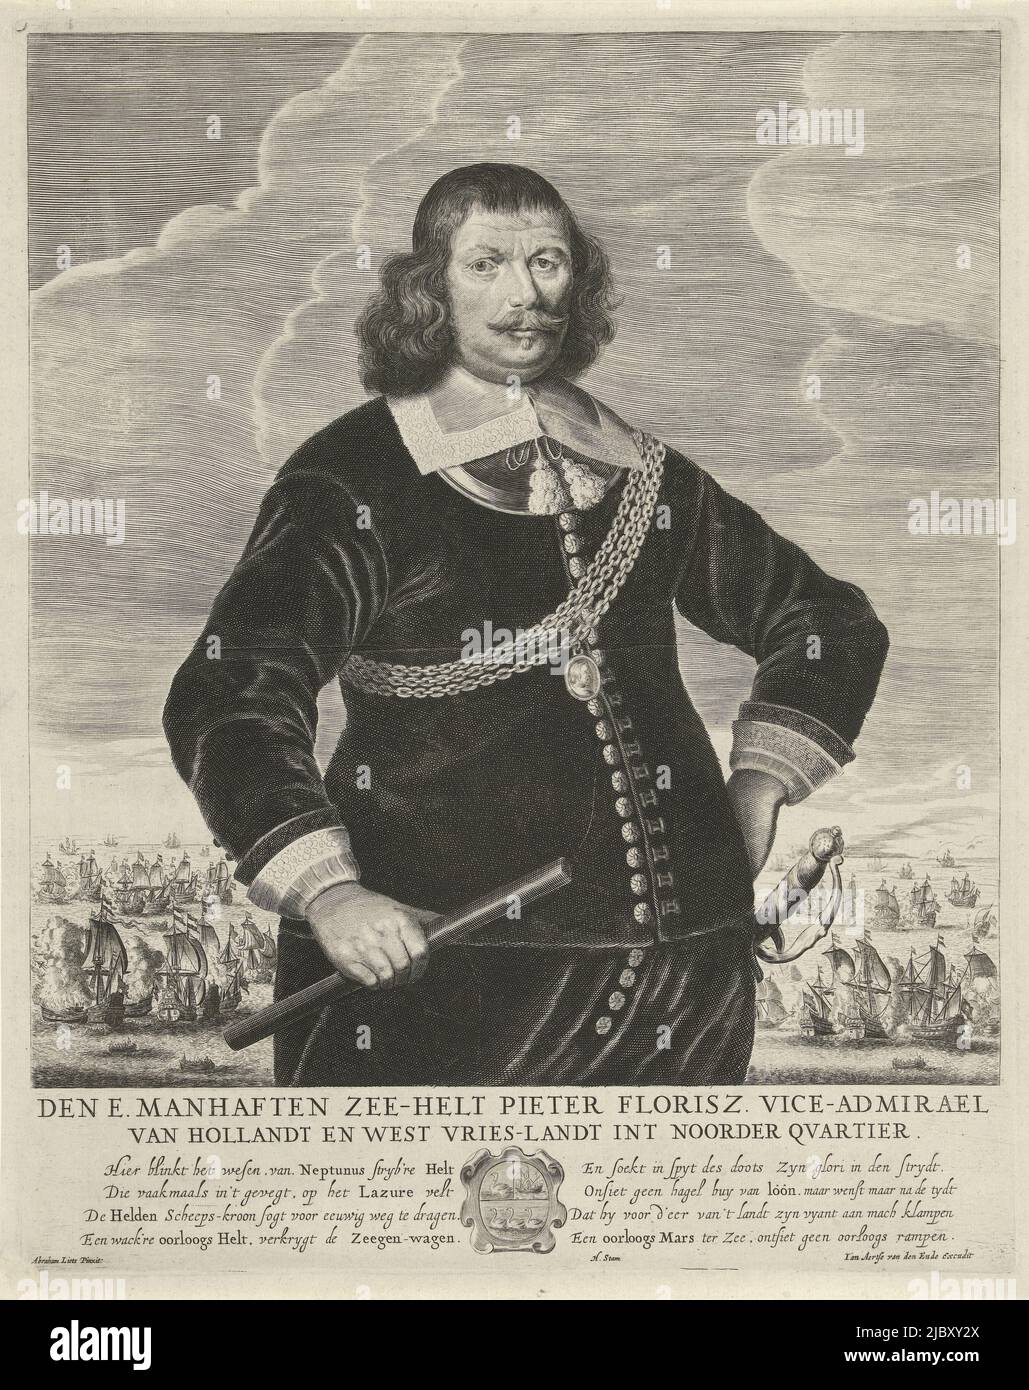 Kneepiece to the right of Pieter Florisz. holding a command staff. In the background a naval battle. Below the portrait his name and title in two lines in Dutch. Below that in two columns of four lines each a poem in Dutch and his coat of arms, Portrait of Pieter Florisse, print maker: Pieter Holsteyn (II), after: Abraham Liedts, (mentioned on object), H. Stam, (mentioned on object), Northern Netherlands, in or after 1658 - 1673, paper, engraving, etching, h 440 mm × w 350 mm Stock Photo